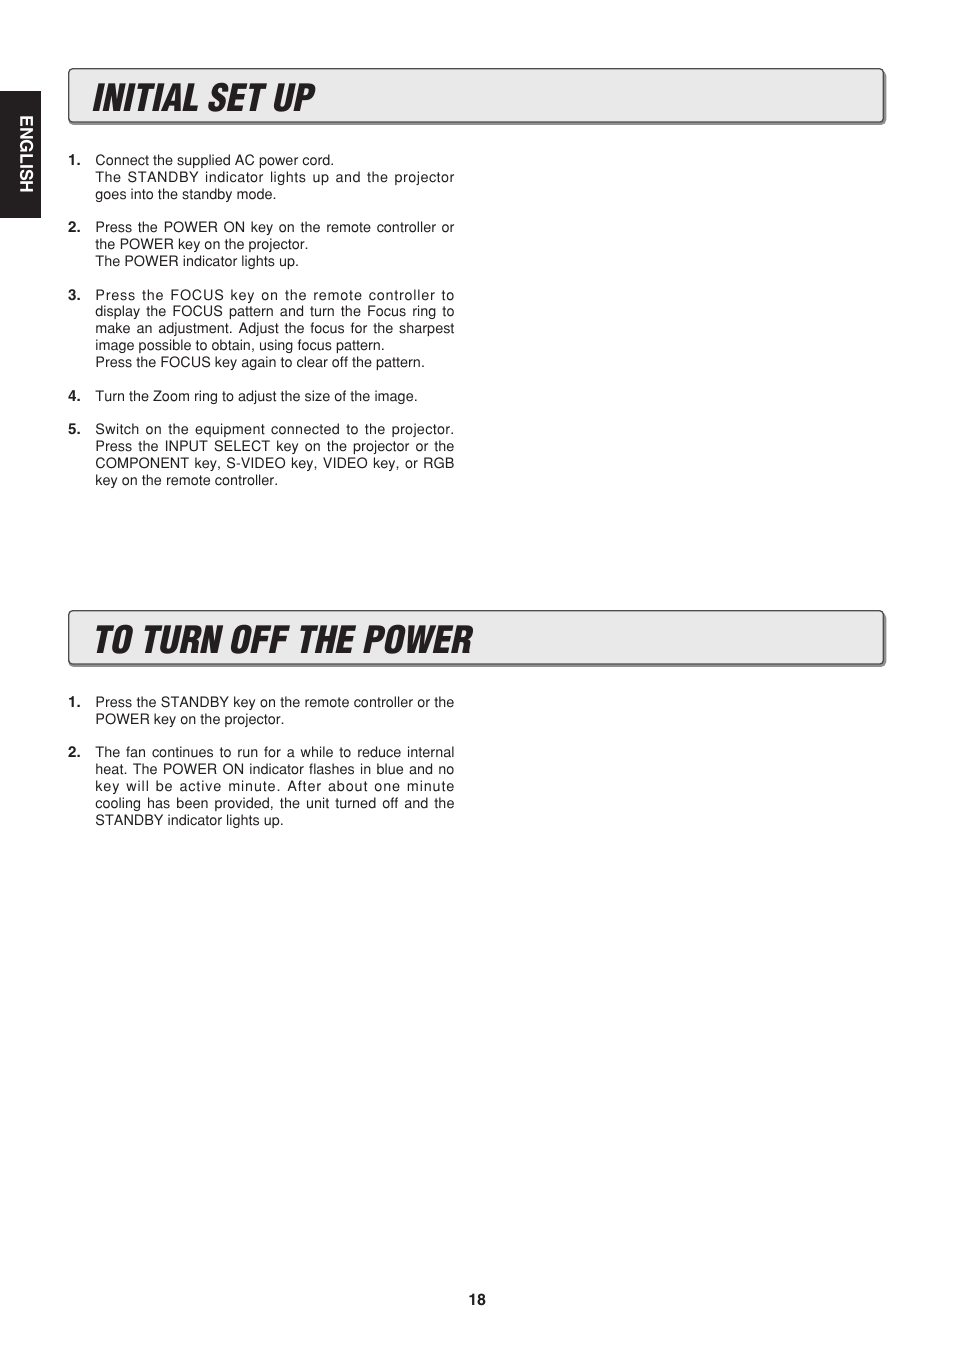 Initial set up to turn off the power | Marantz VP-12S1N User Manual | Page 20 / 31